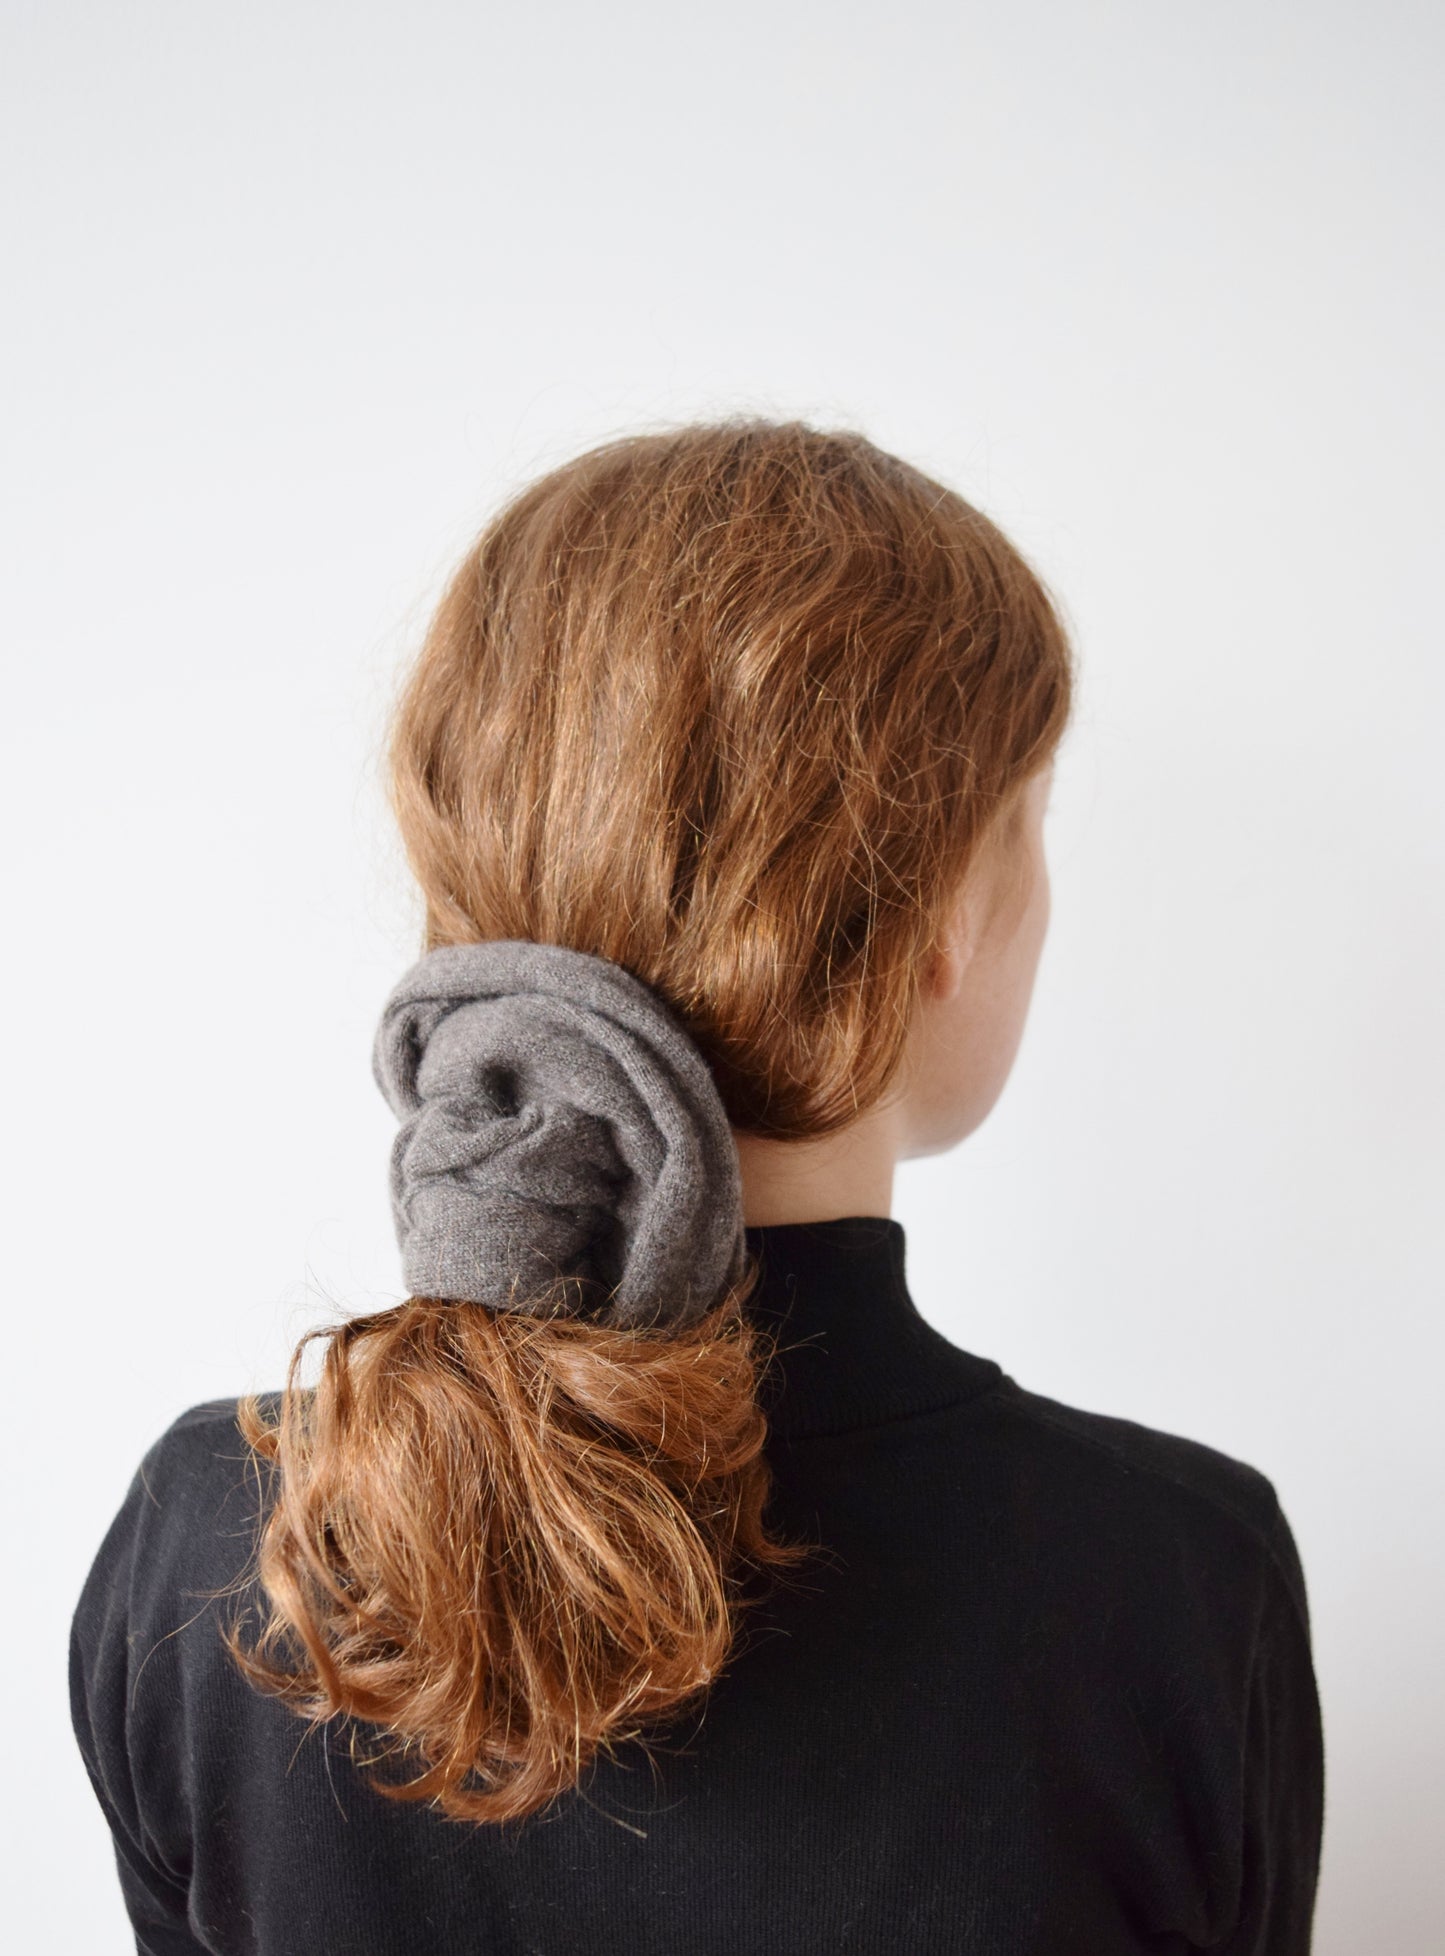 XLarge Cashmere Hair Tie in Fawn | Upcycled Scrunchie